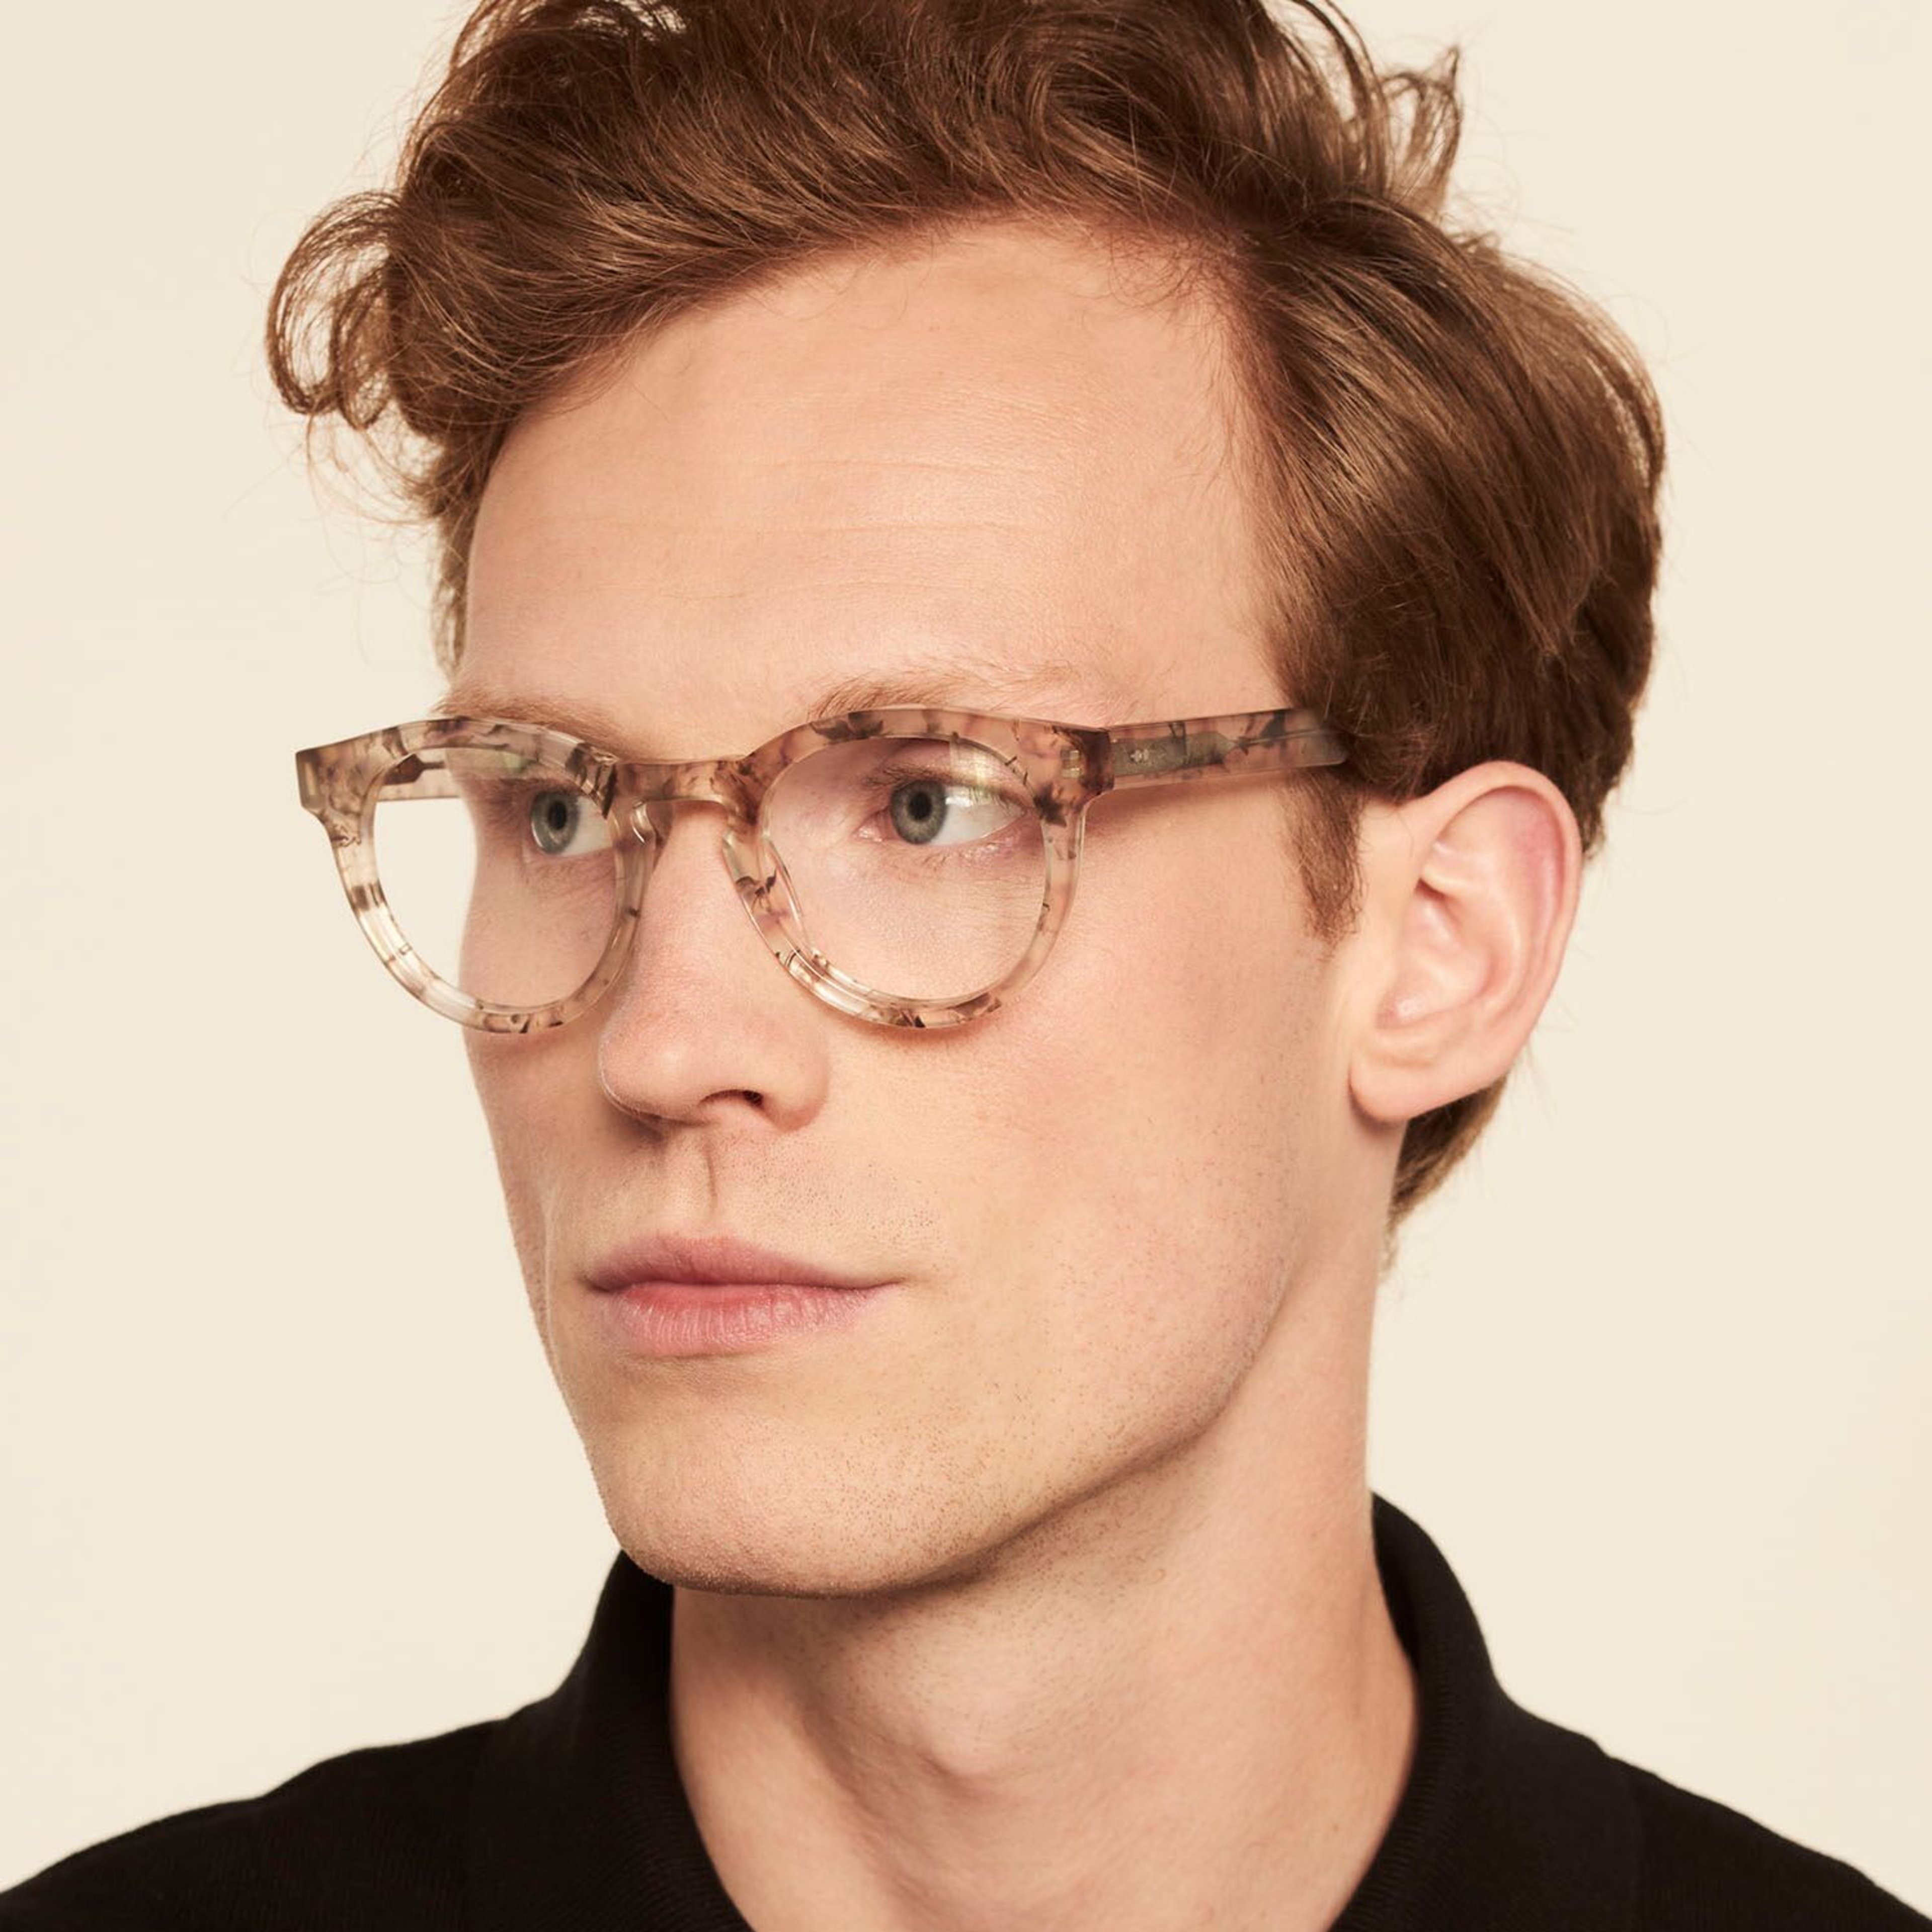 Ace & Tate Glasses | Round Acetate in Brown, Grey, White